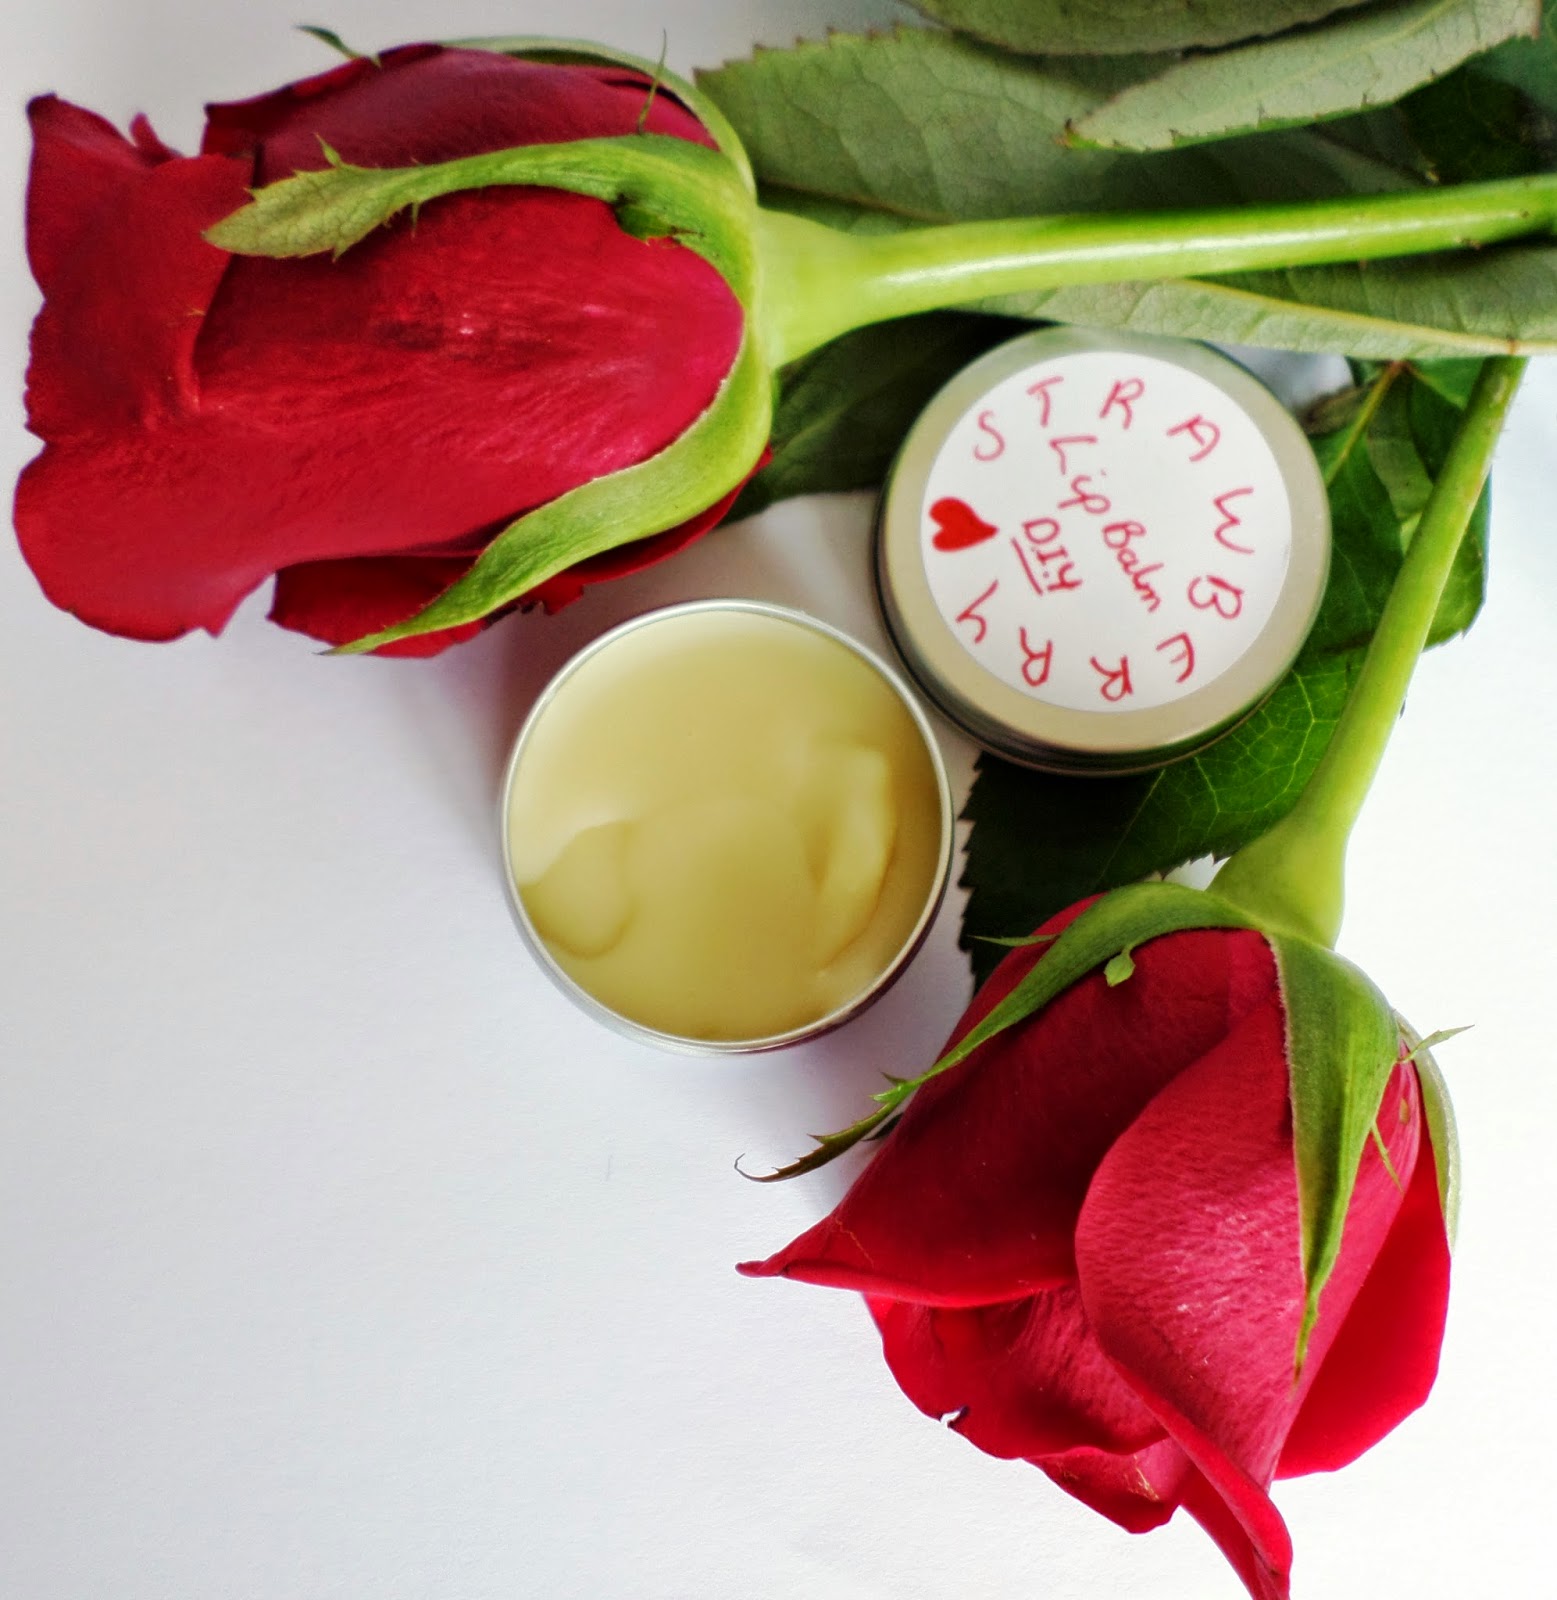 Sweet Cecily's Make Your Own DIY Natural Lipbalm Kit in Strawberry 